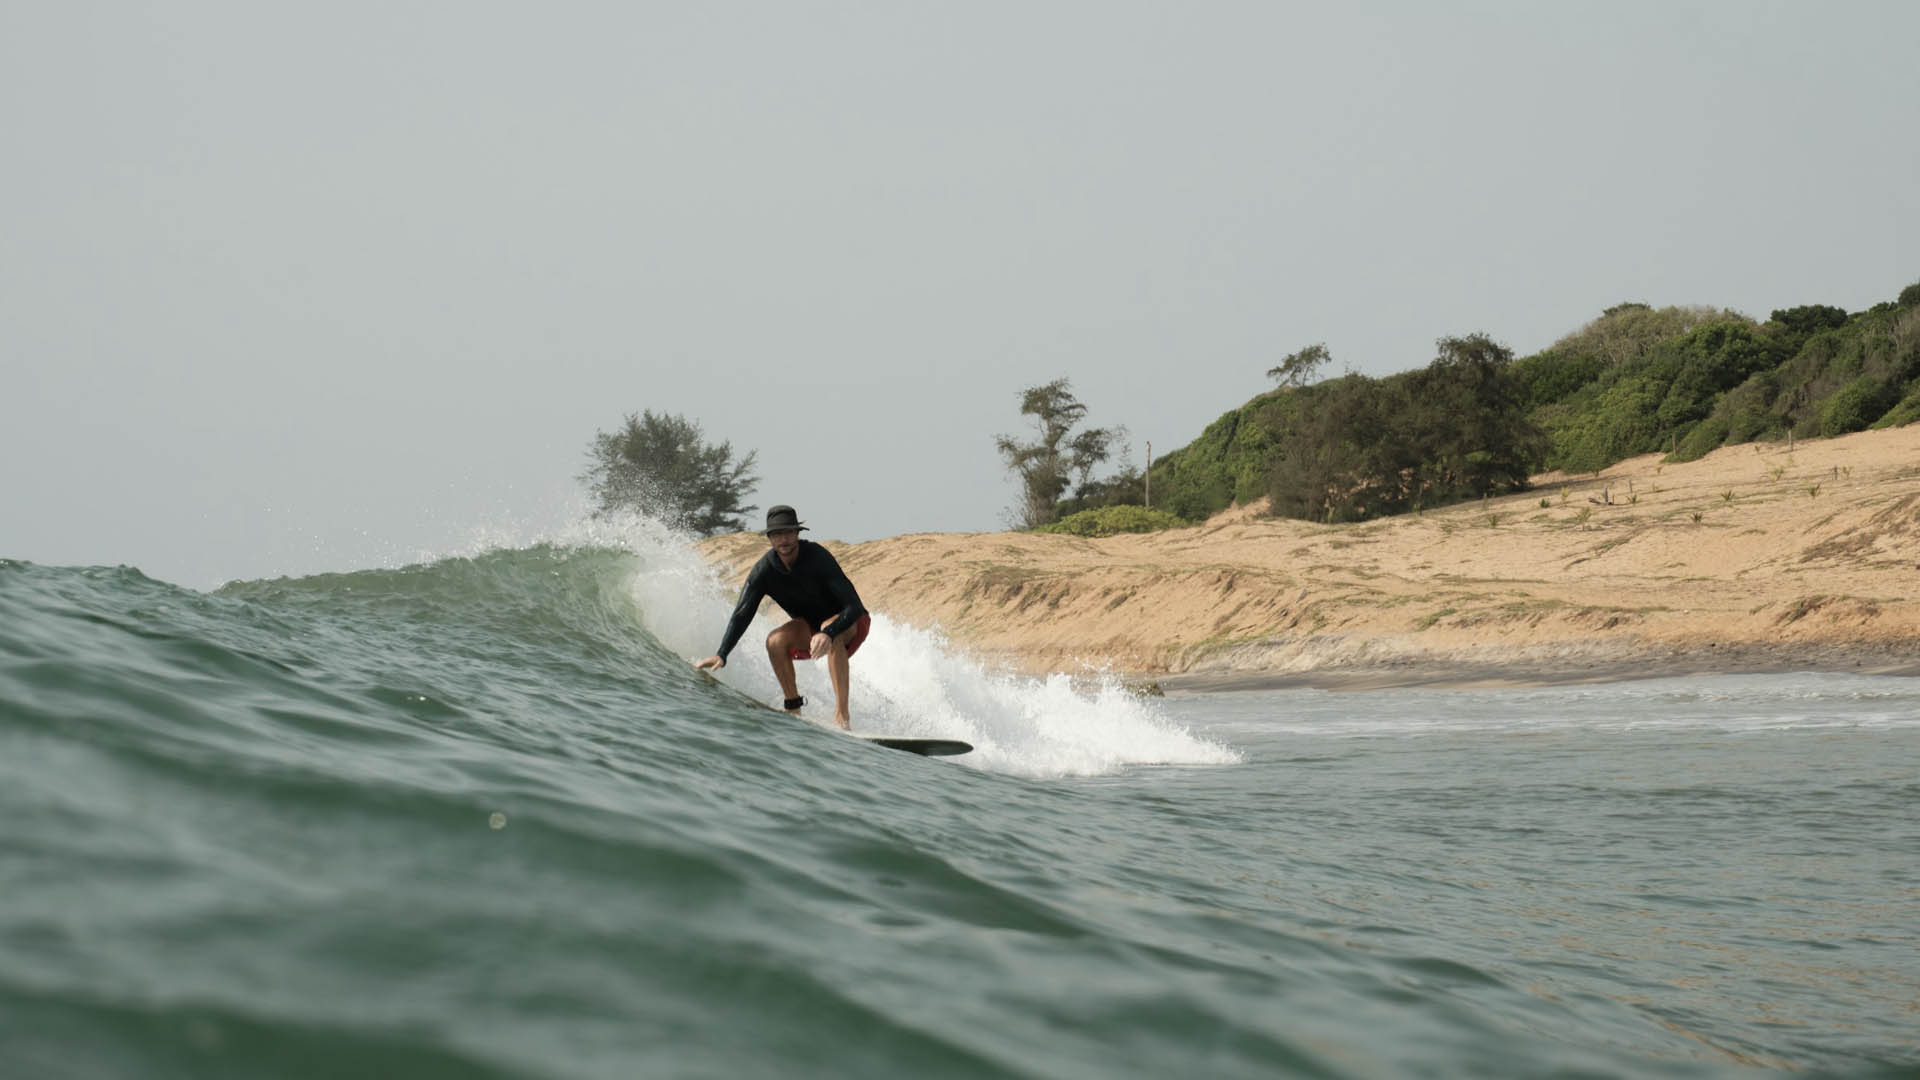 Surfing Sri Lanka - A Paradise for Wave Enthusiasts